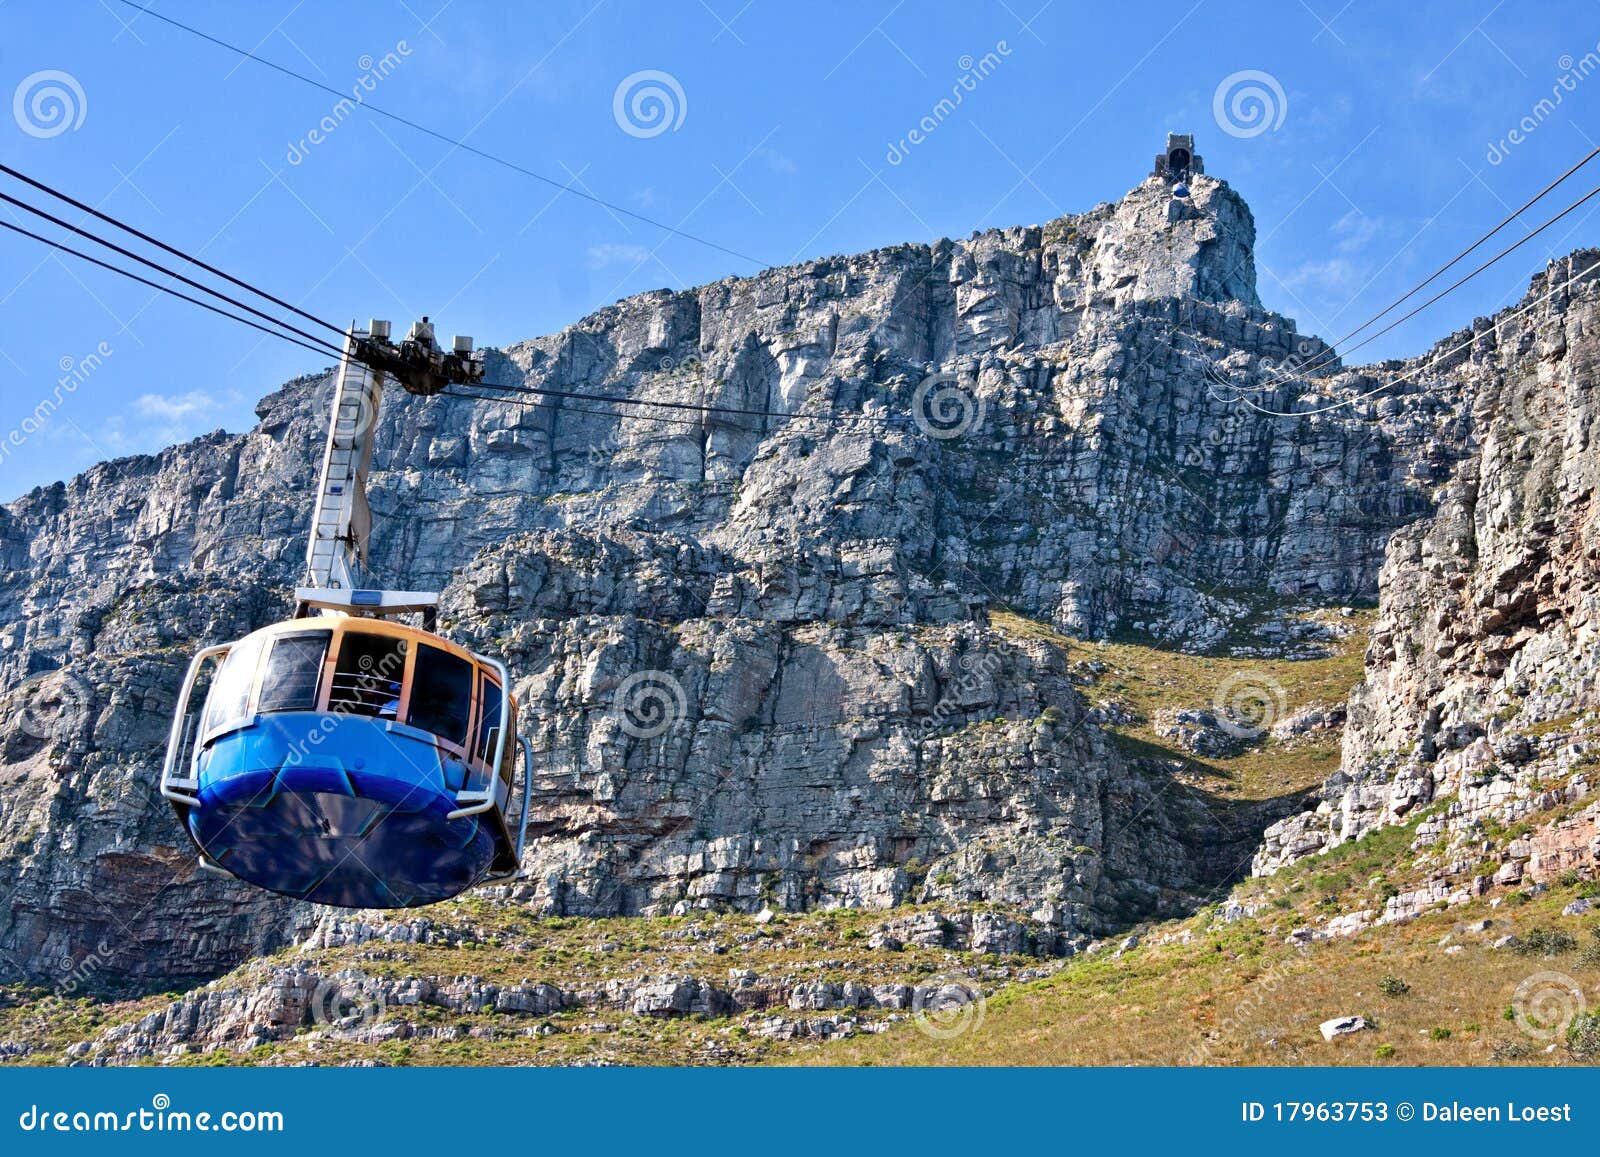 table mountain cable way